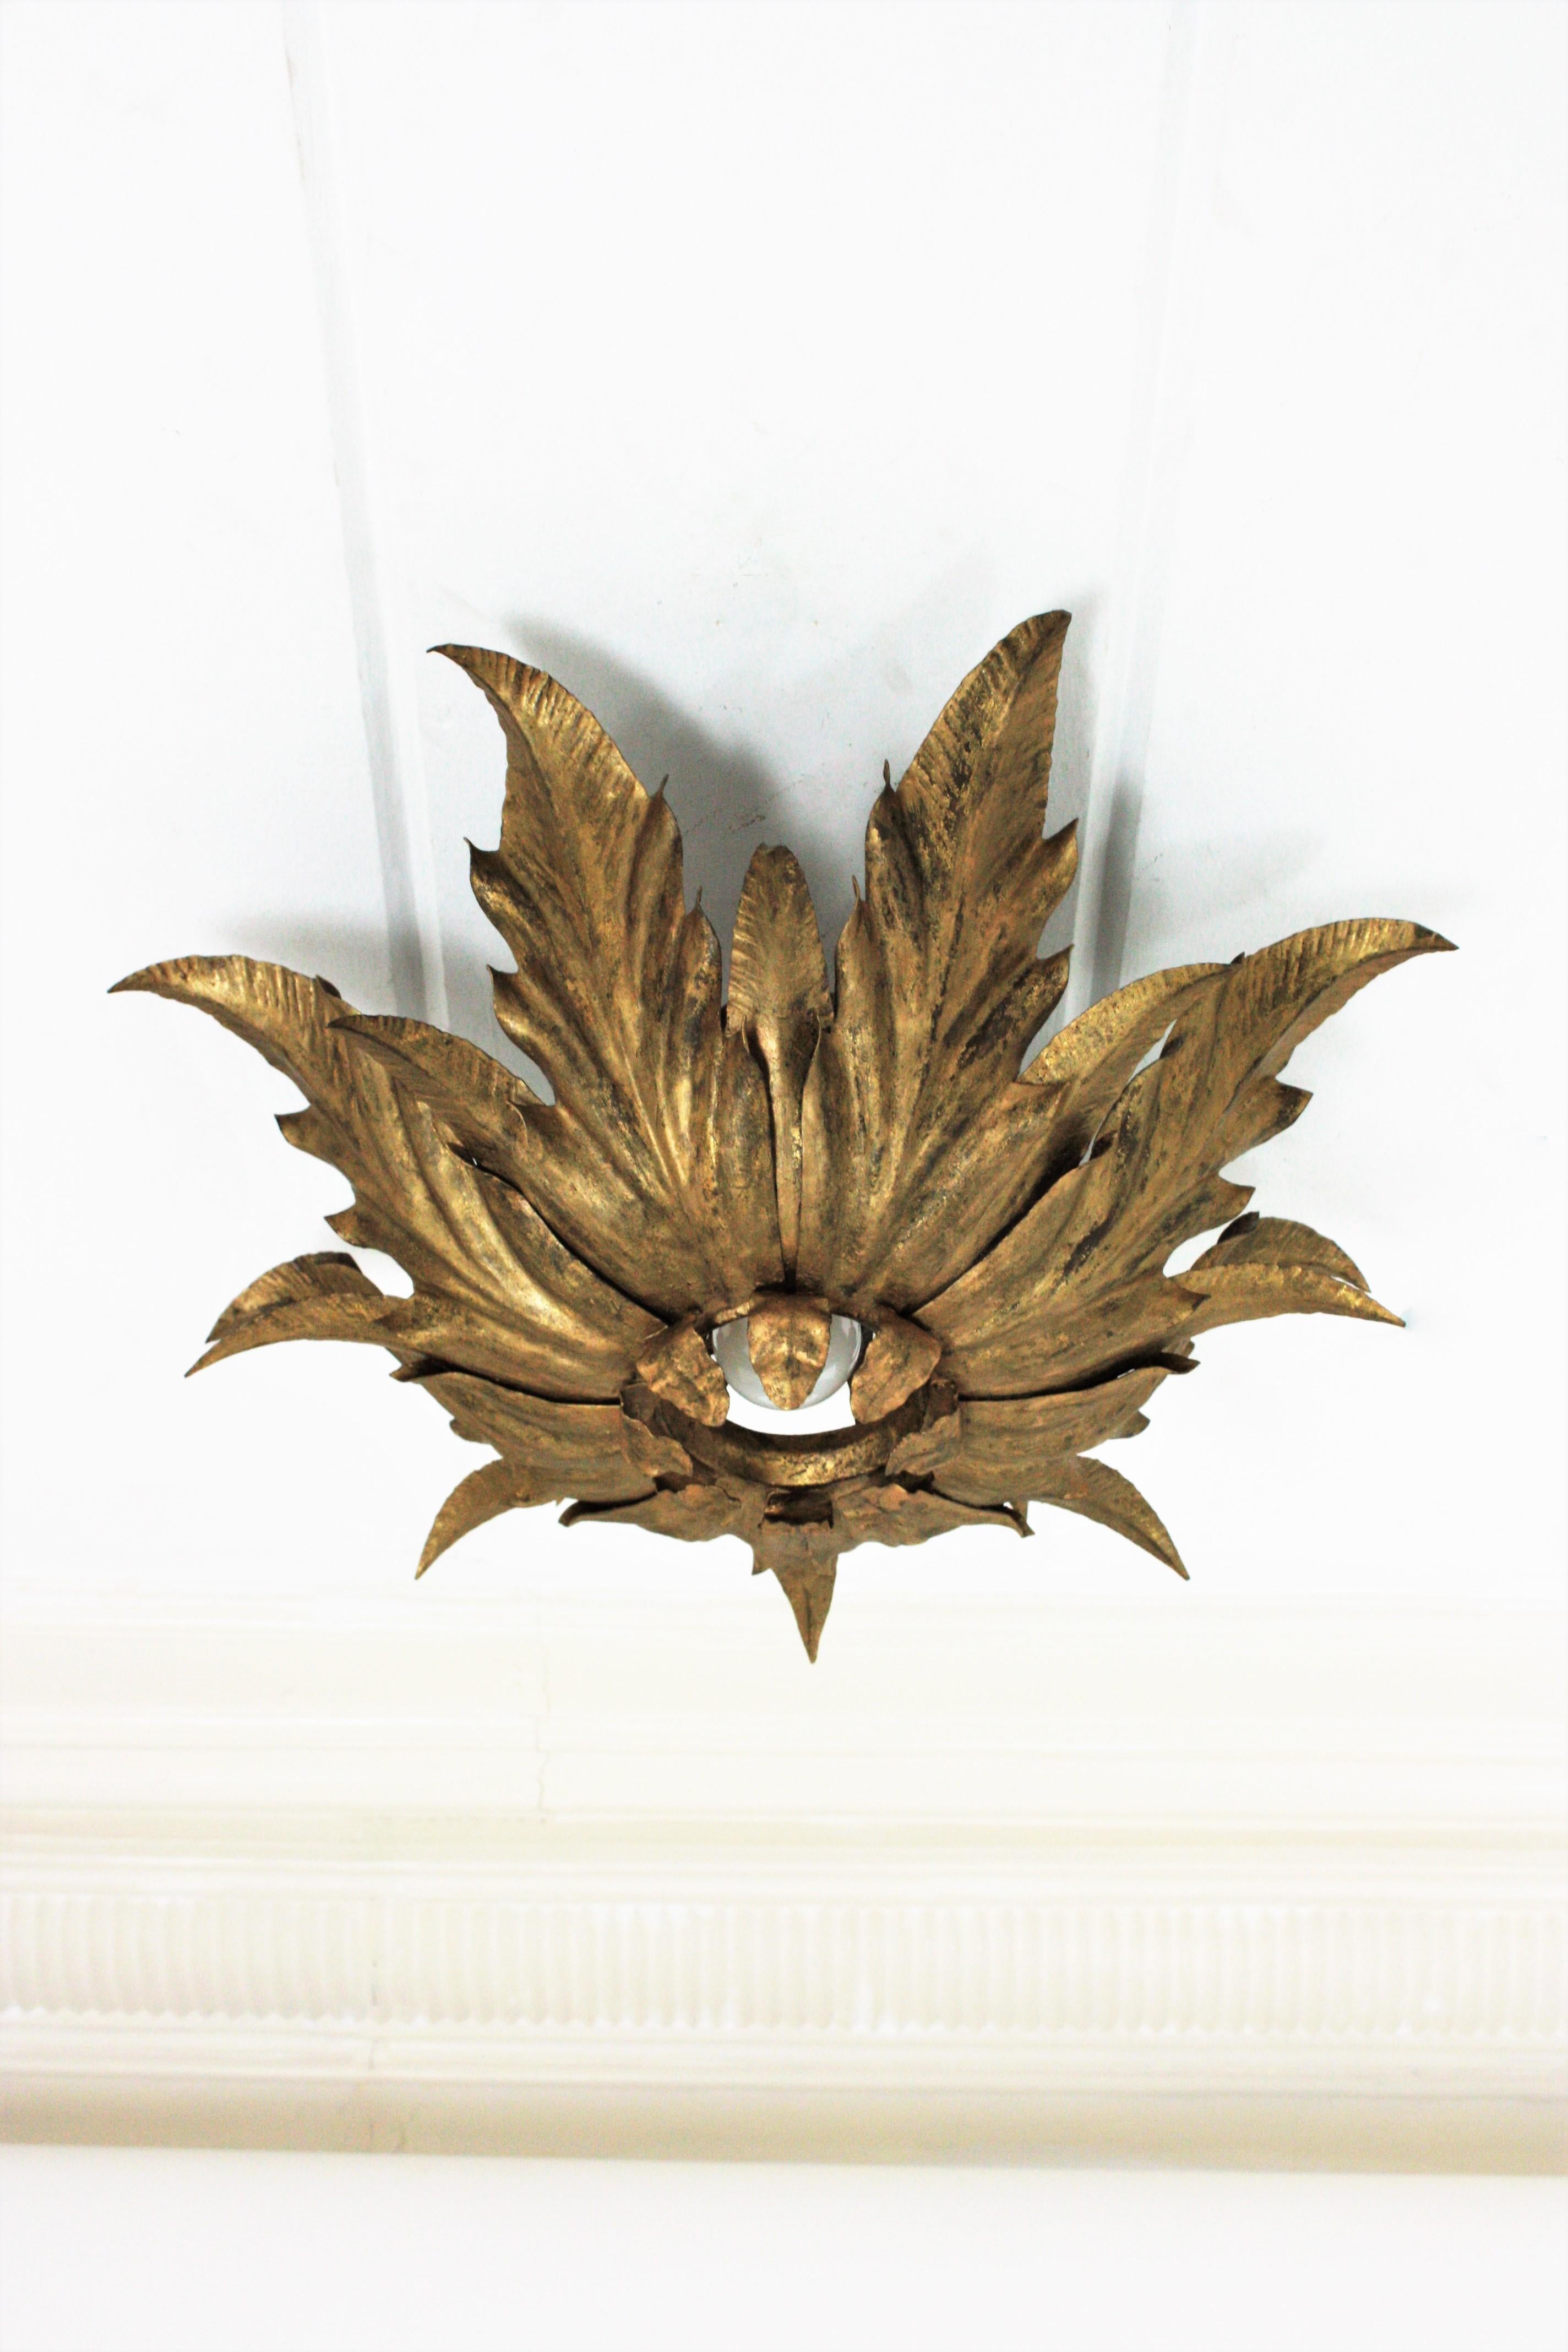 Stunning flower or sunburst ceiling light fixture, gilt iron, gold leaf, France, 1950s.
This eye-catching ceiling lamp features a double layered leafed frame of leaves surrounding a central exposed bulb. A layer of small curved leaves and a second